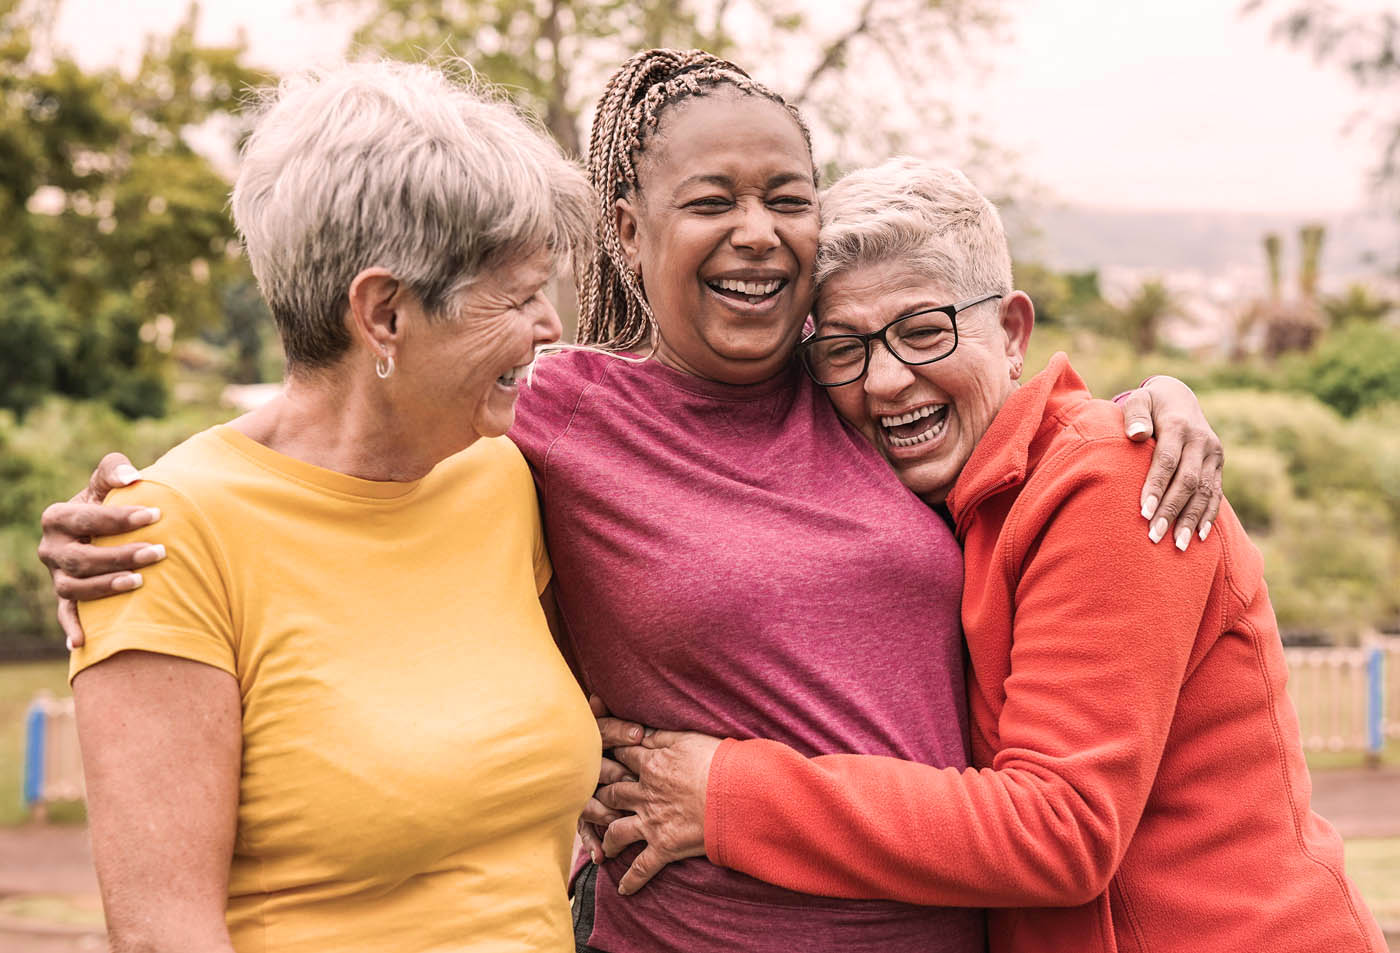 A group of elderly women laughing and hugging each other - discover Southlake multiple sclerosis pain treatment today.